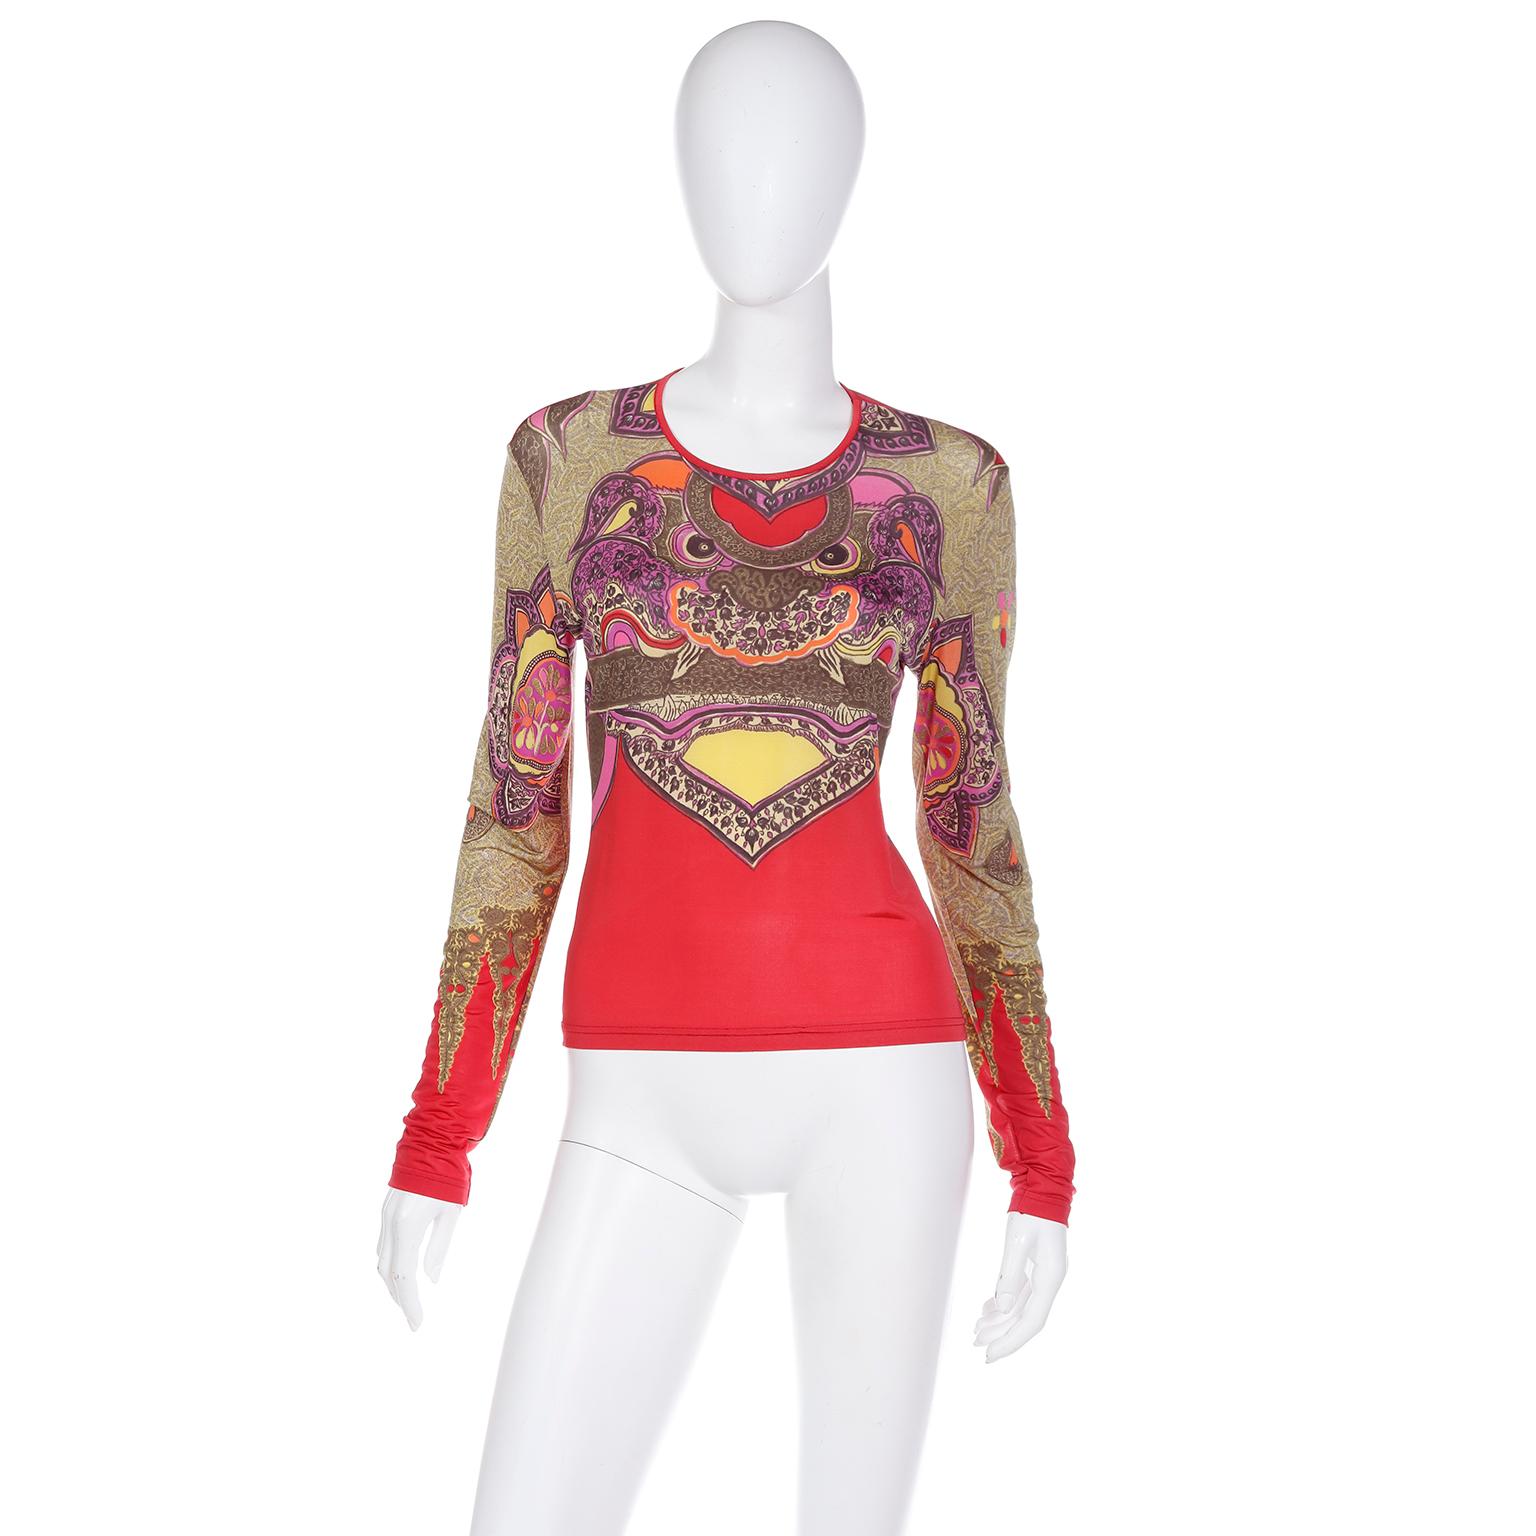 This unique vintage 1990s Christian Lacroix Bazar stretch knit top features a colorful Chinese dragon print in various shades of purple, red, green, yellow, pink, orange and a green grey. The top has Lacroix's signature tattoo type long sleeves. The